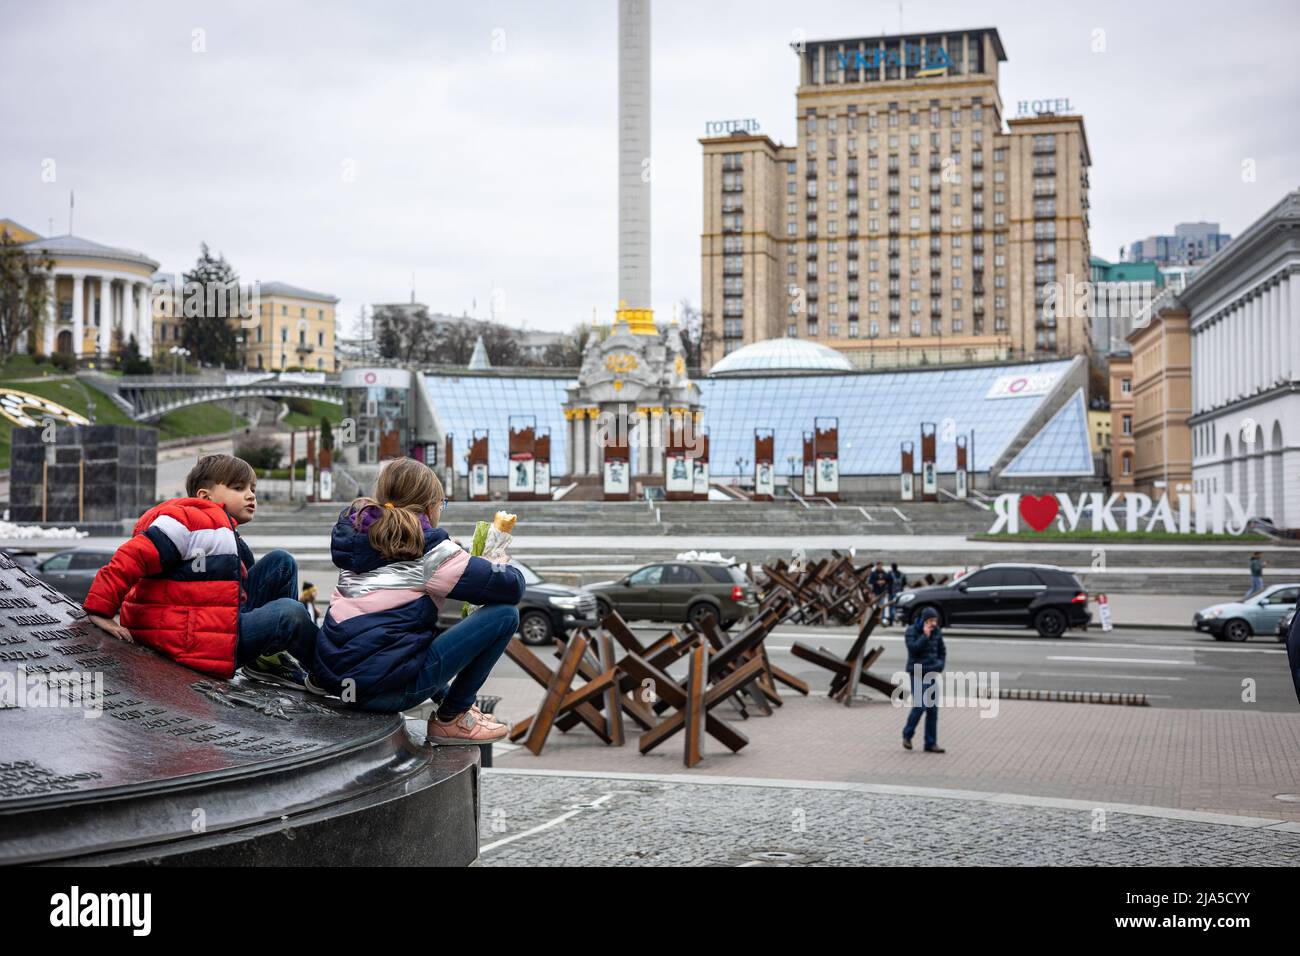 KYIV, UKRAINE - APR 20, 2022: Anti-tank hedgehogs or Czech hedgehogs on the side of the road are ready to block Independence Square in the event of an Stock Photo